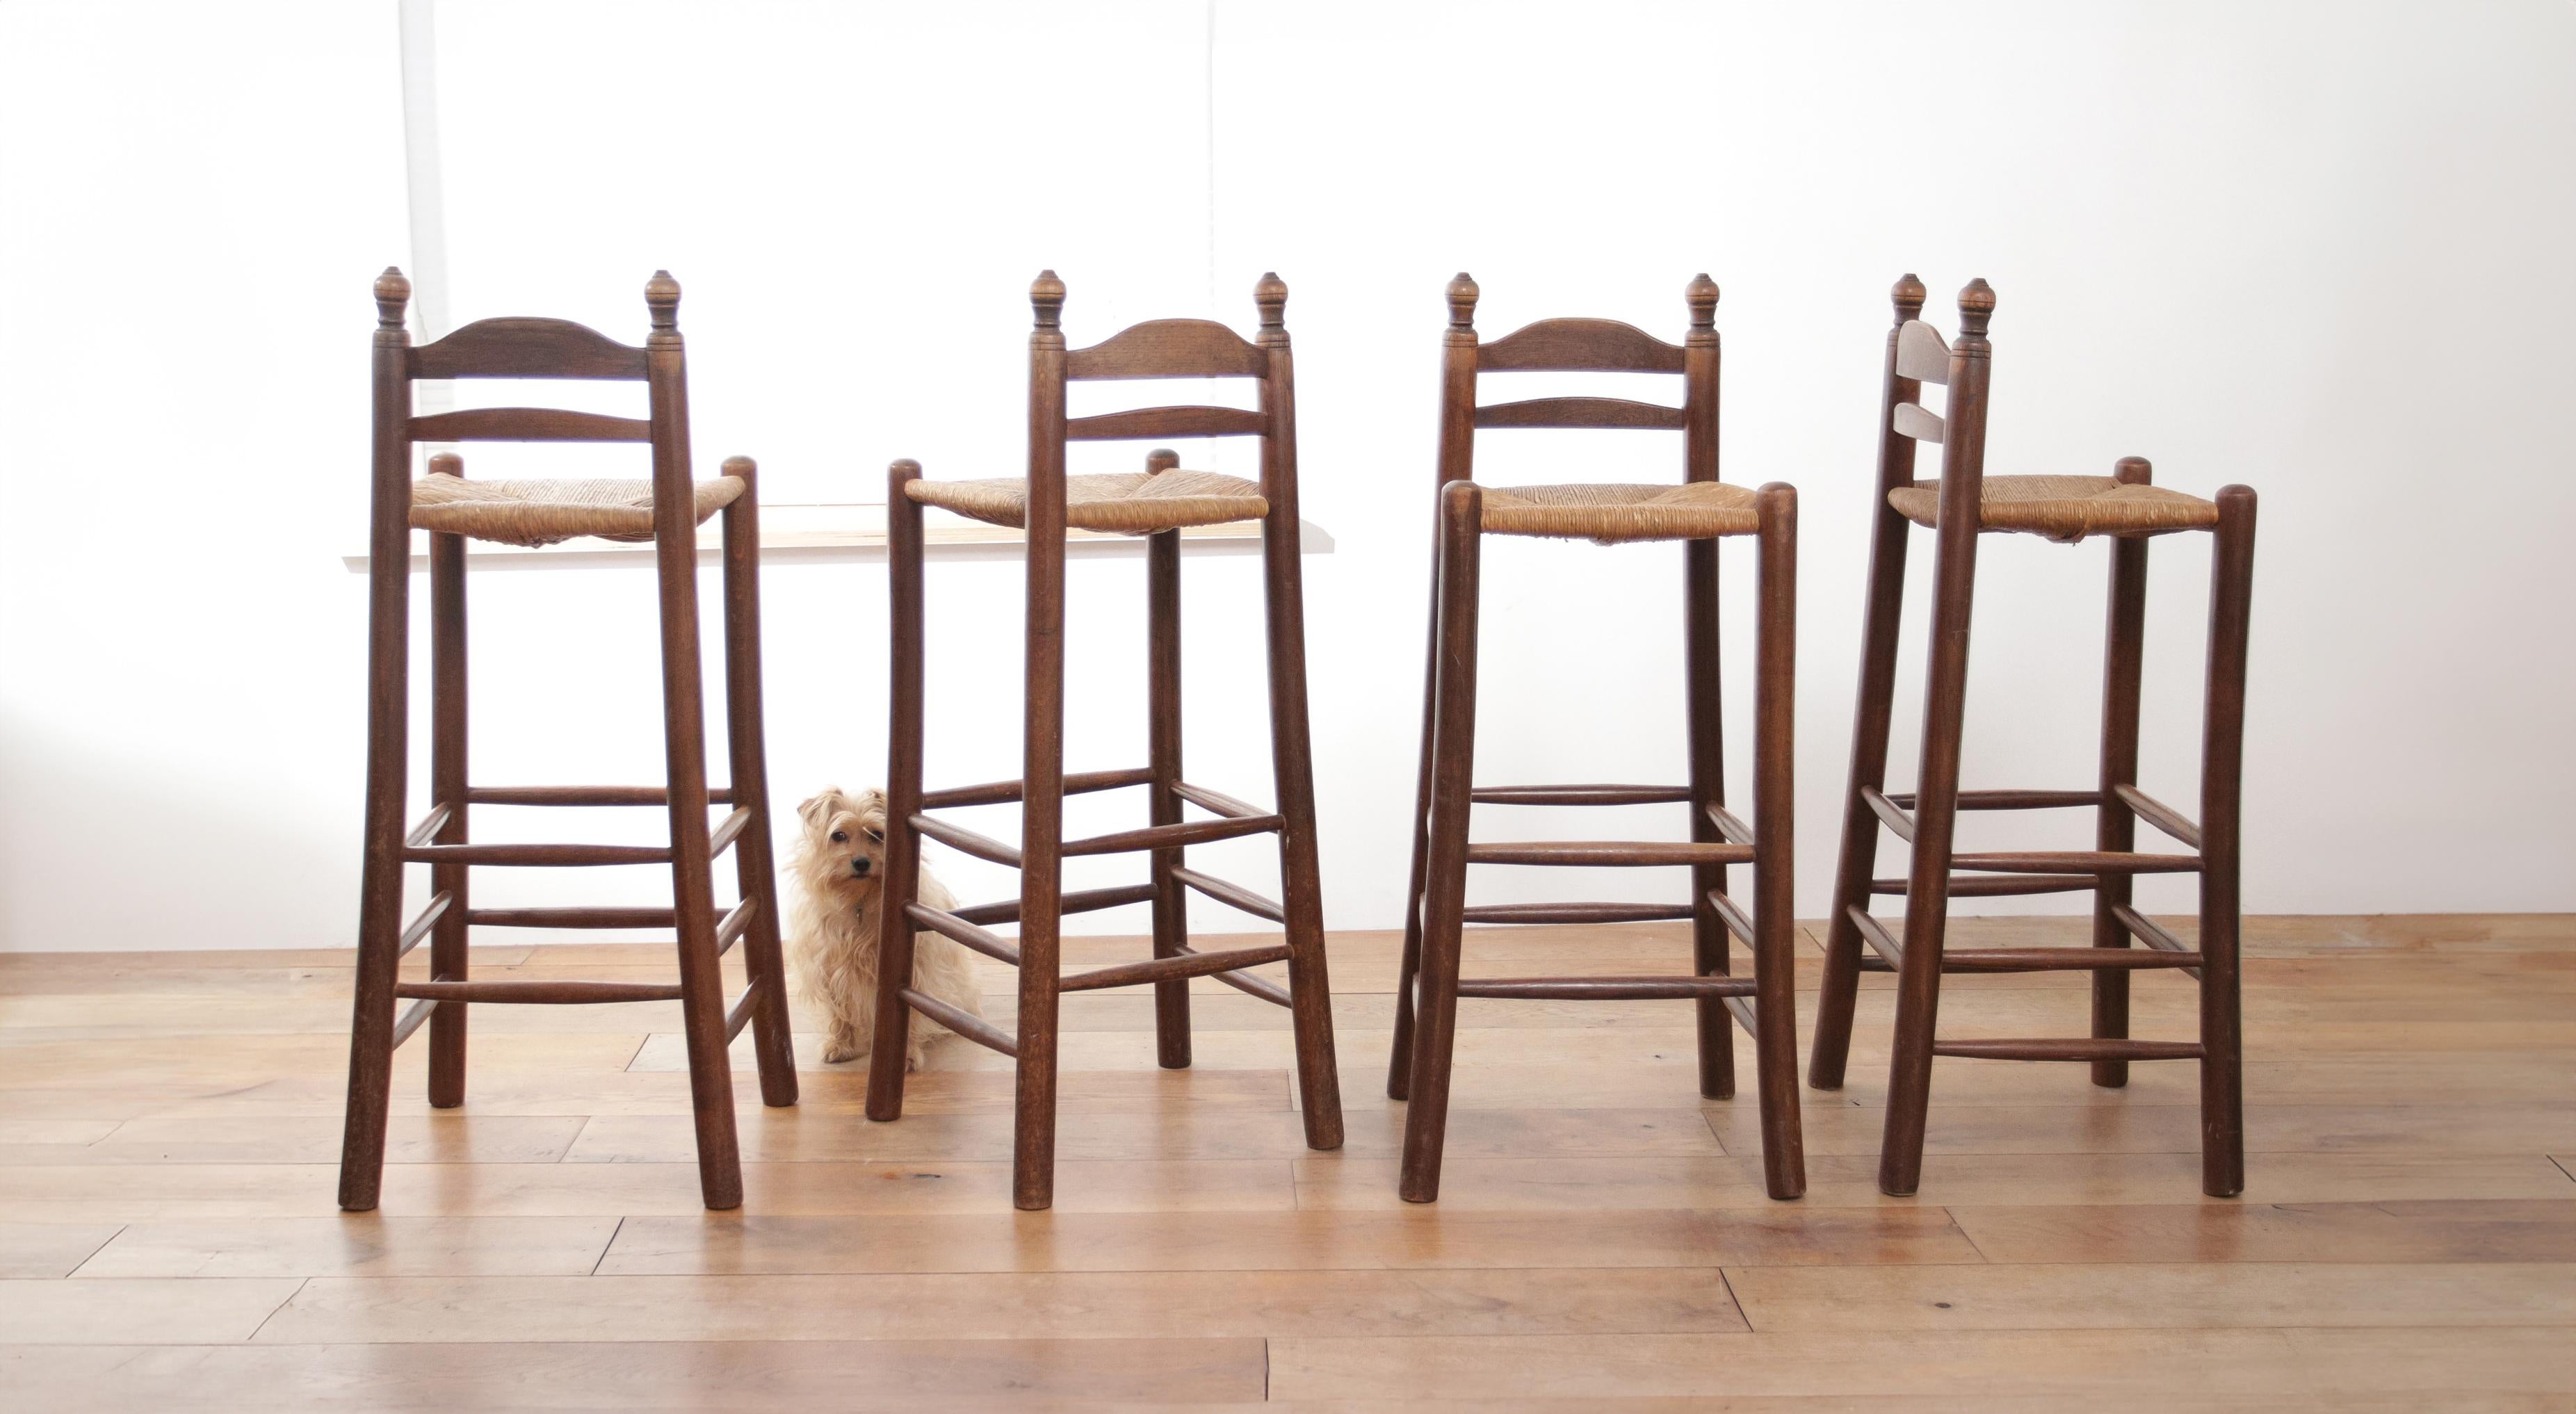 These solid oak barstools have a traditional Dutch design, and are made around 1960. They have a classic silhouette with vertical slats on the backrest, turned legs, and crossbars that also serve as footrests. The seats are woven with rush, which